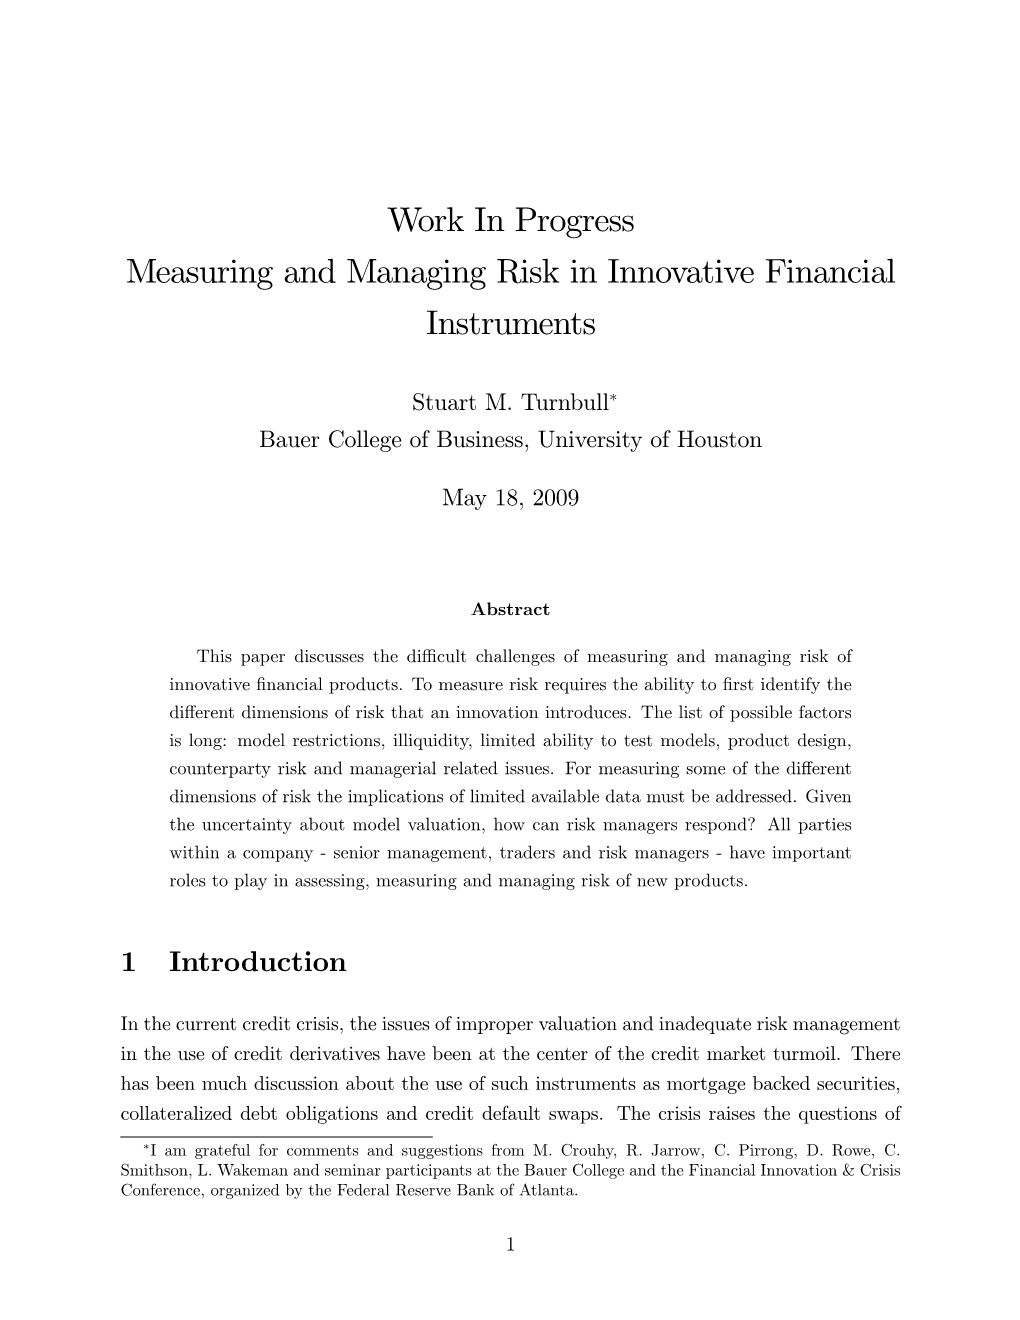 Work in Progress Measuring and Managing Risk in Innovative Financial Instruments